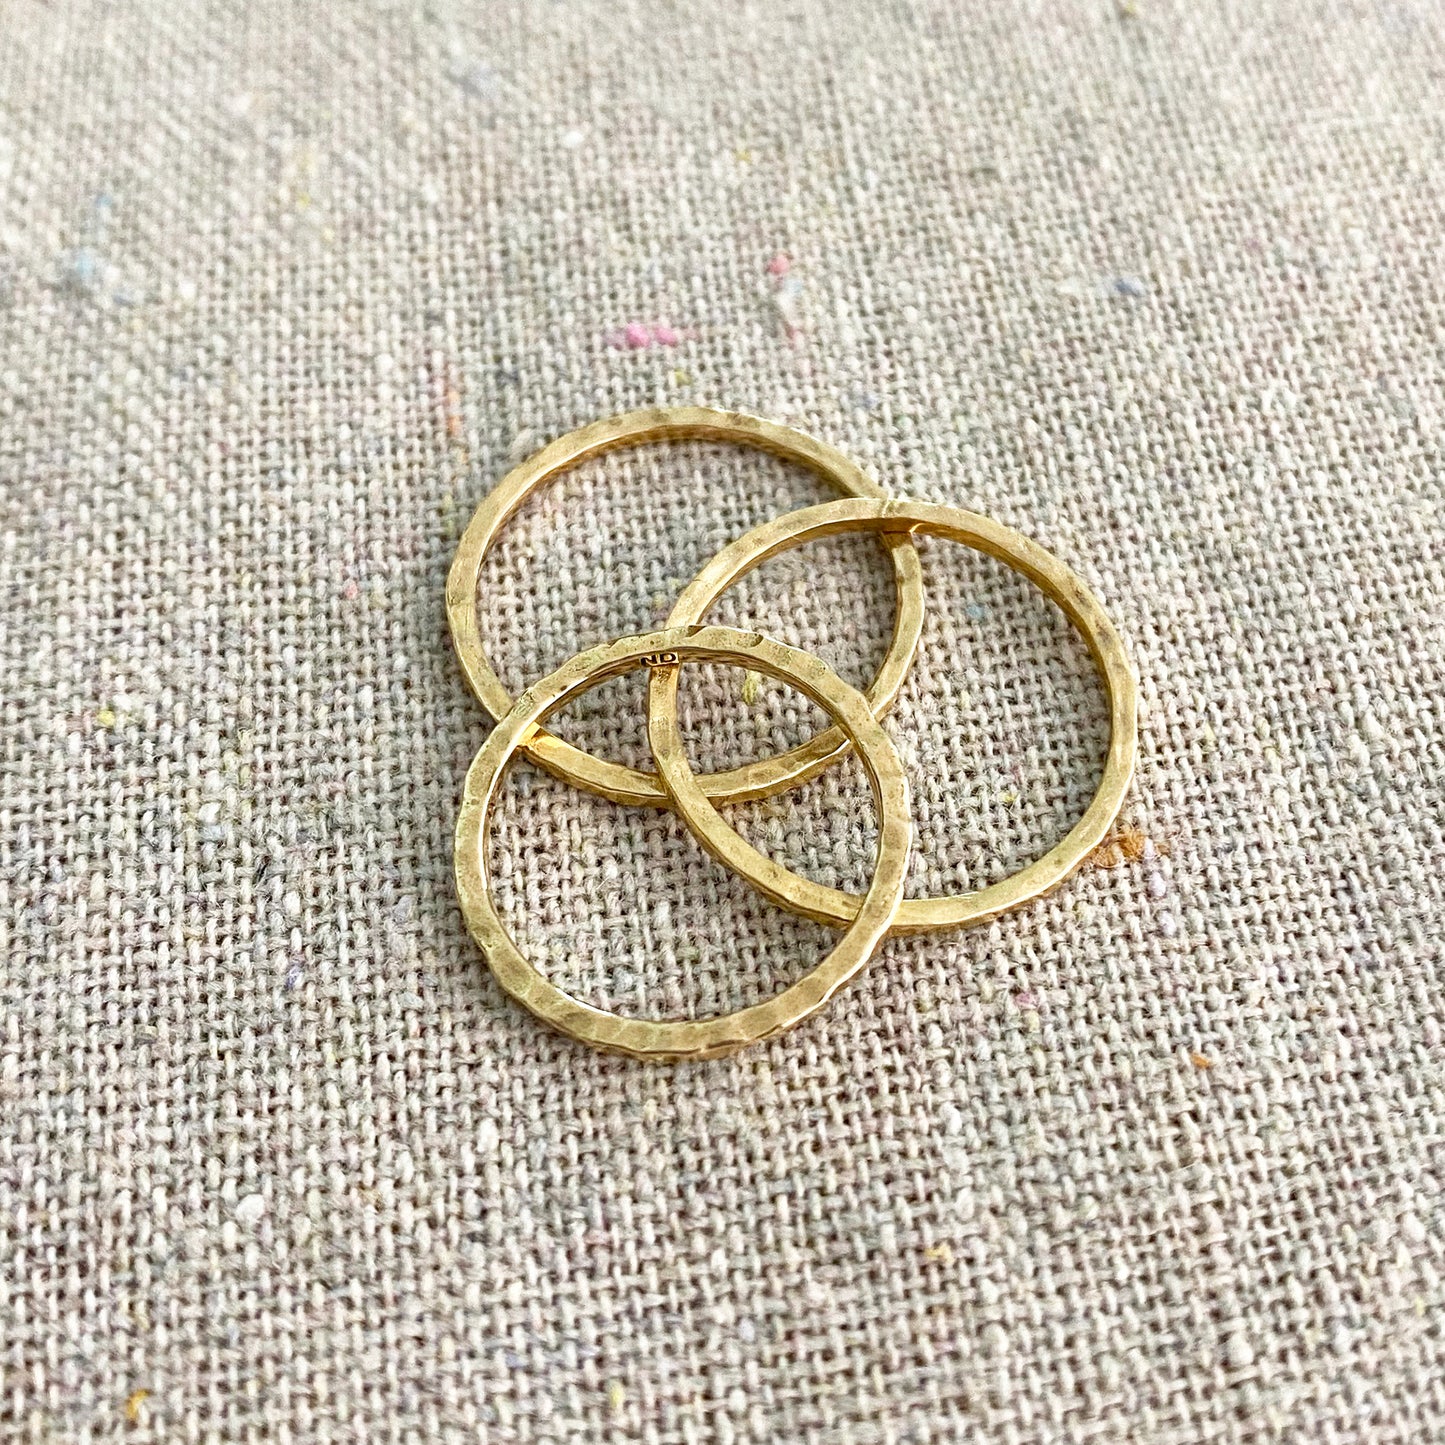 Hammered Stacking Ring • Bronze • Standard or Midi